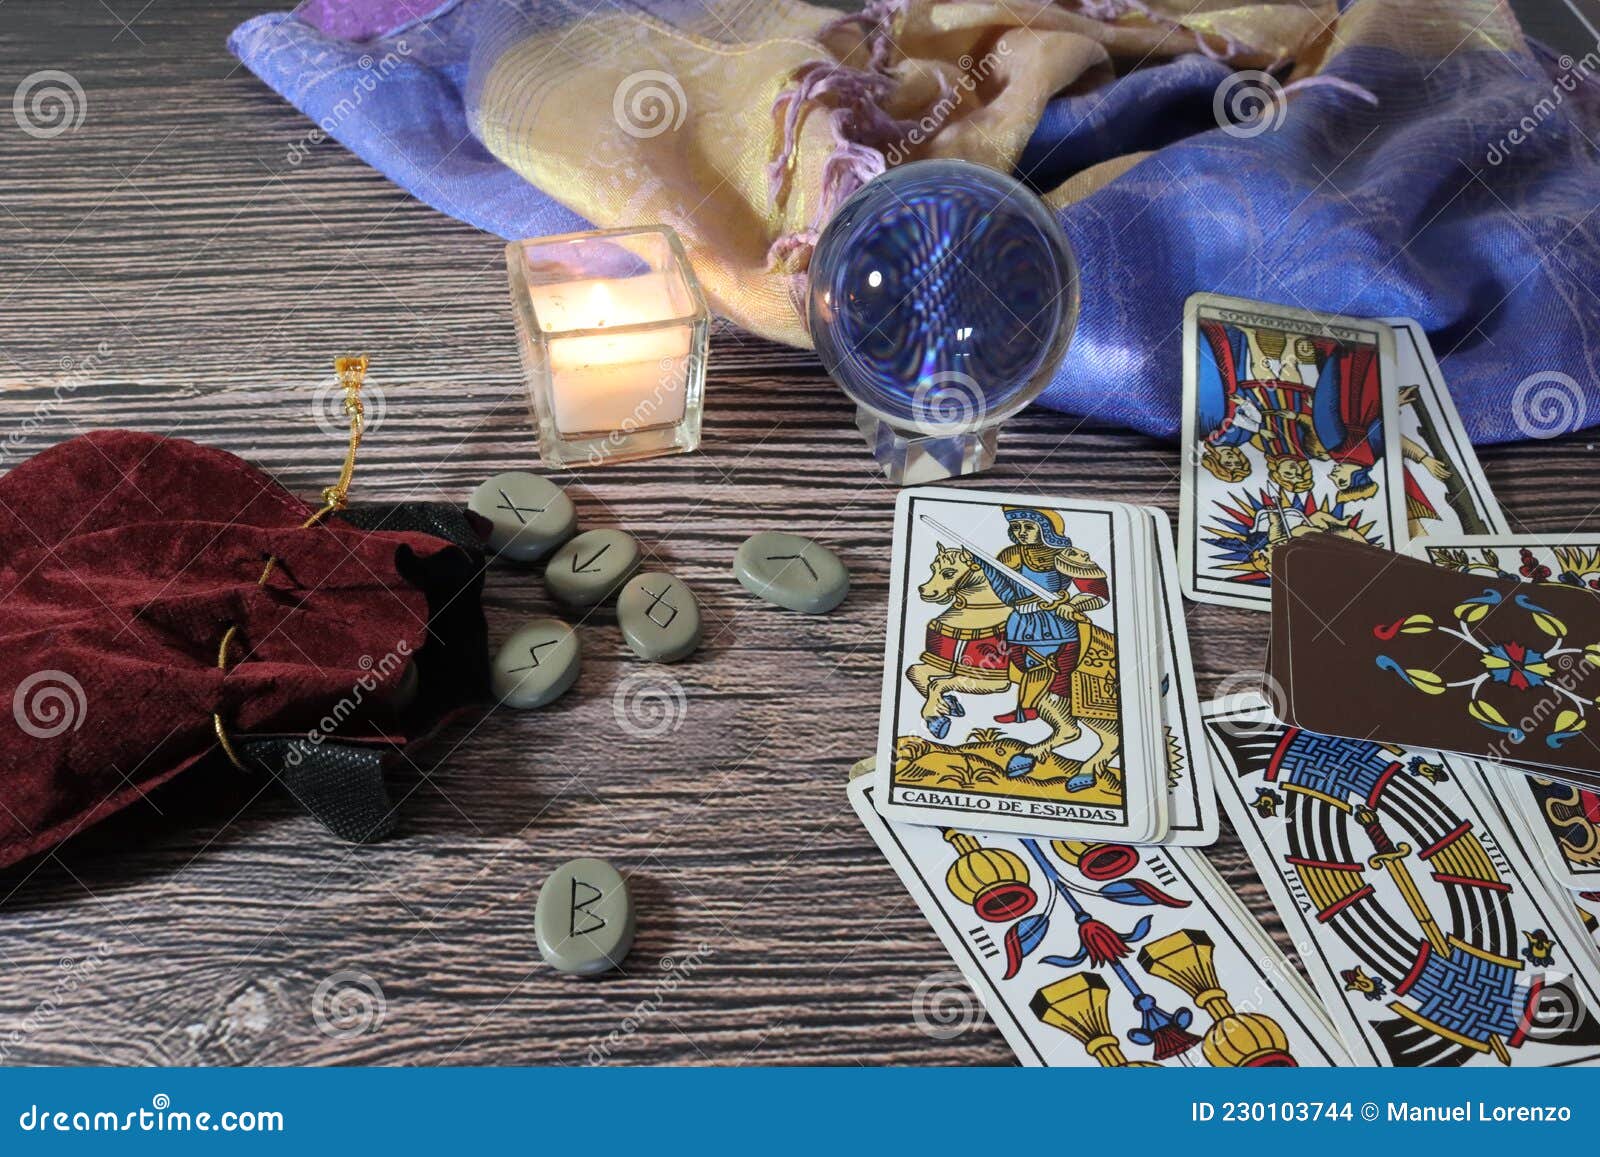 future clairvoyance faith divination runes letters witchcraft belief